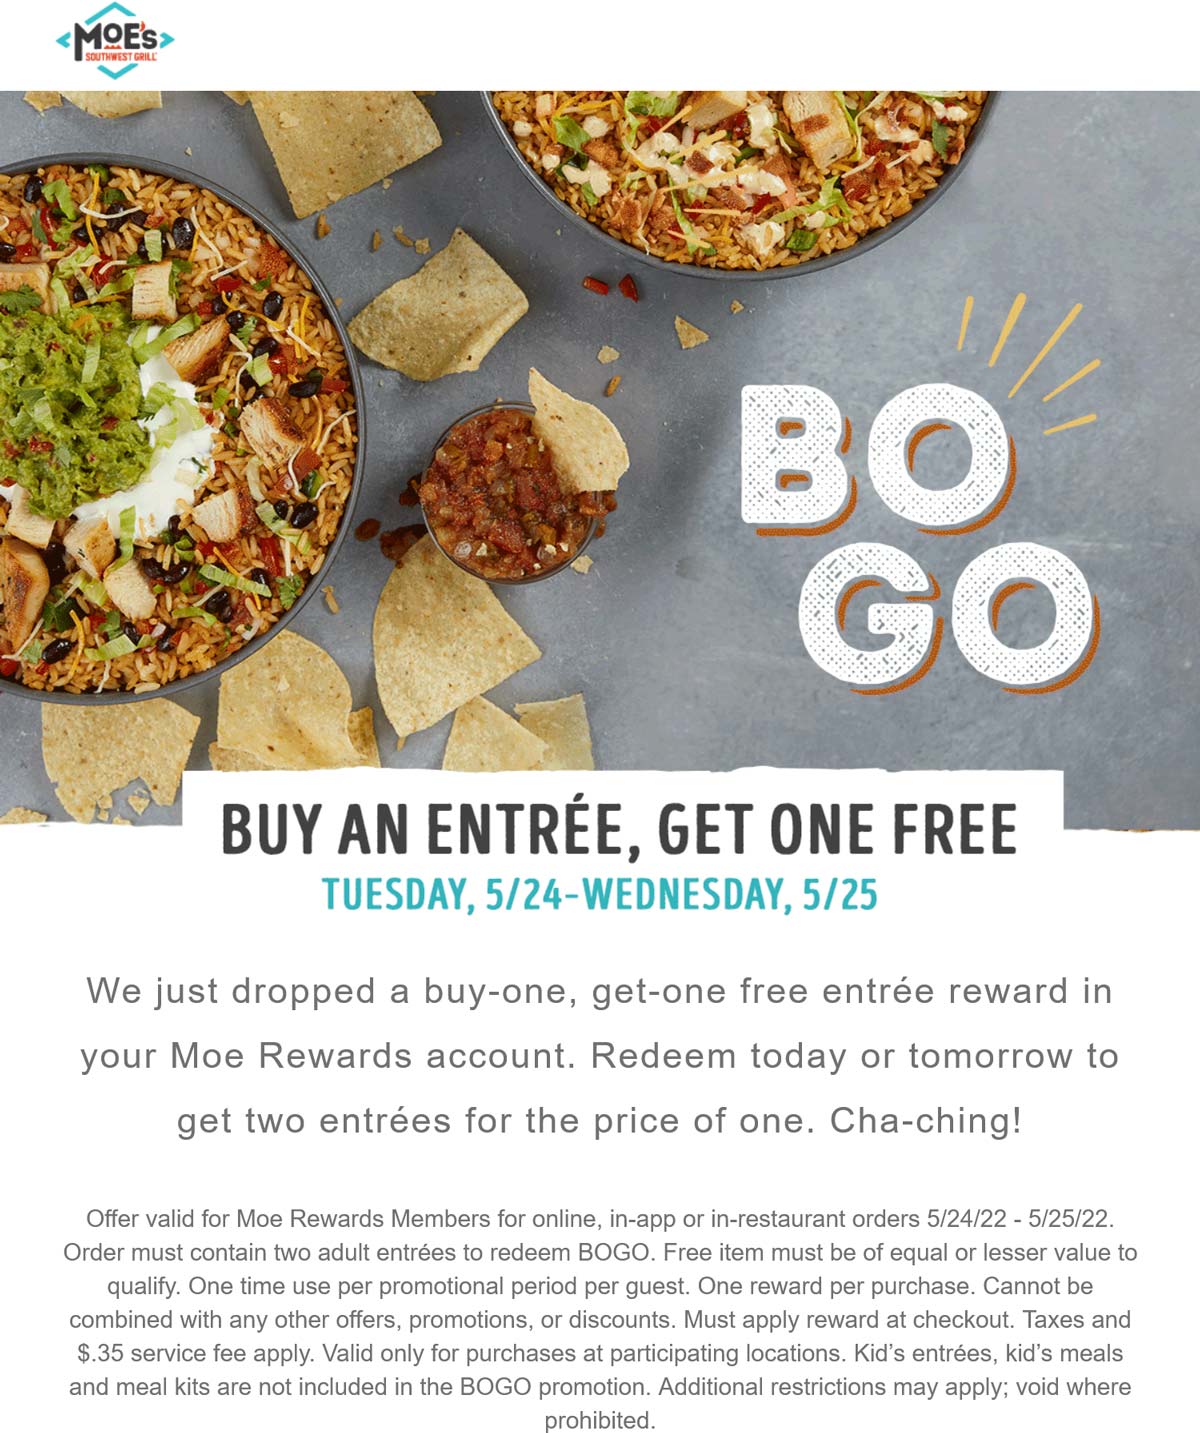 Moes Southwest Grill coupons & promo code for [November 2022]